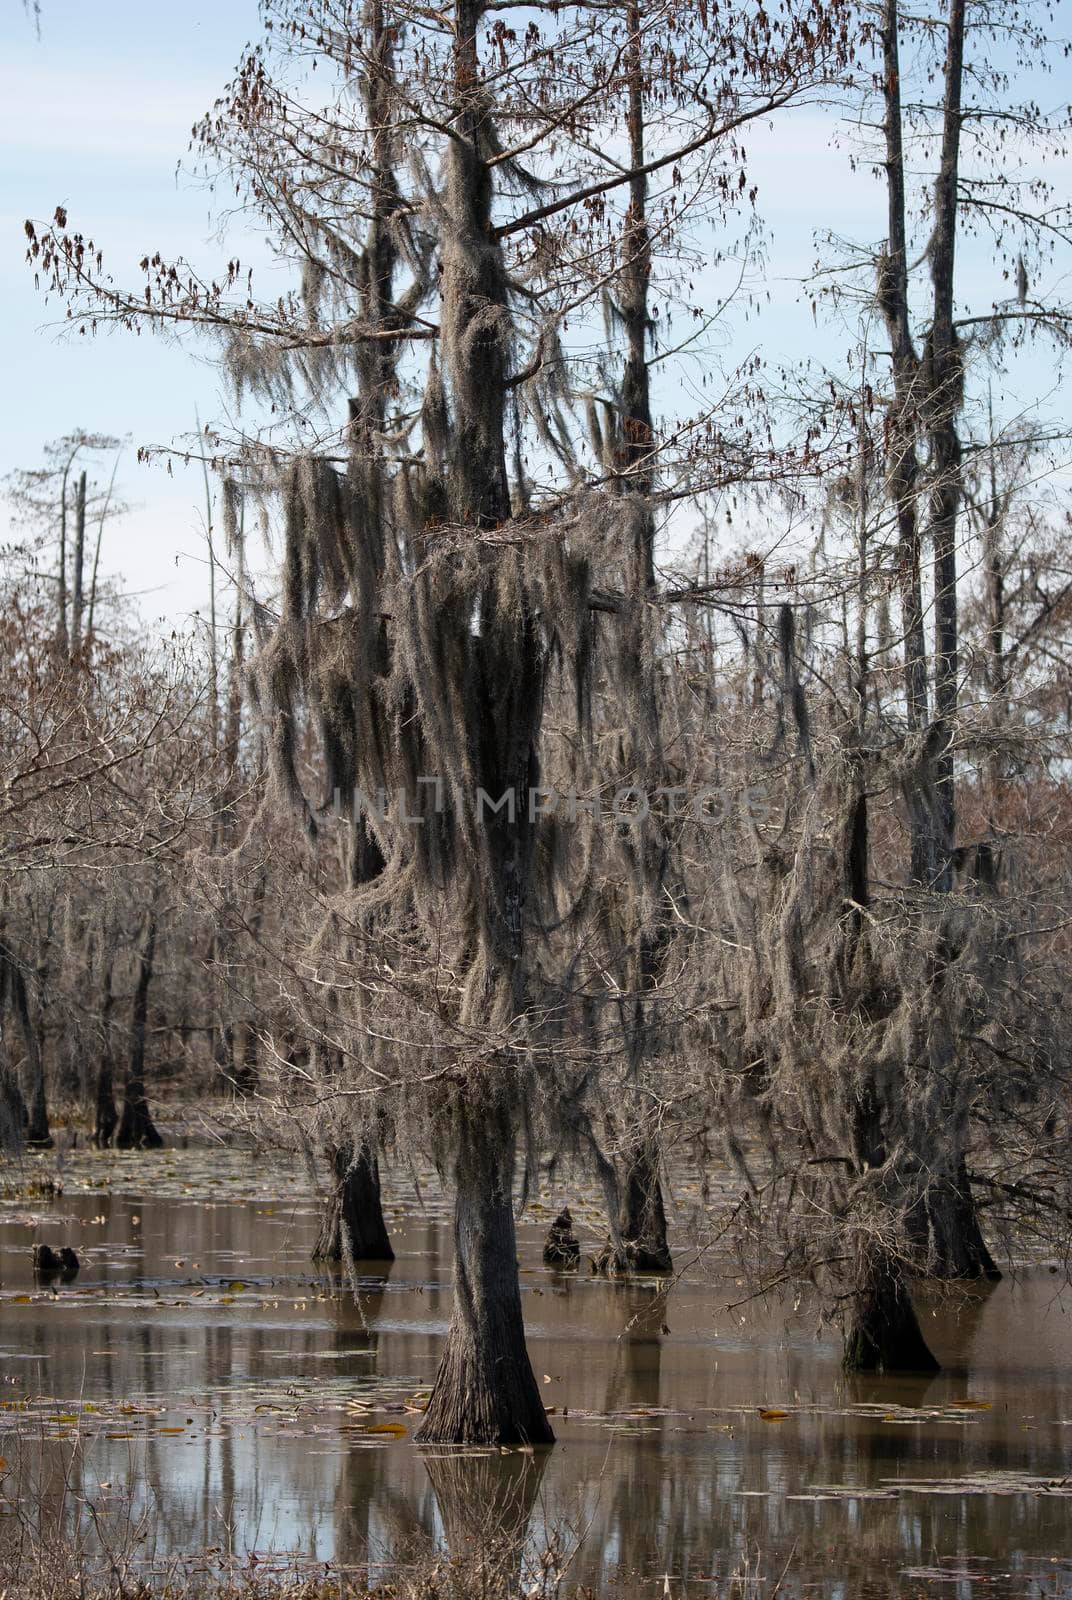 Trees covered in Spanish moss in the swamp